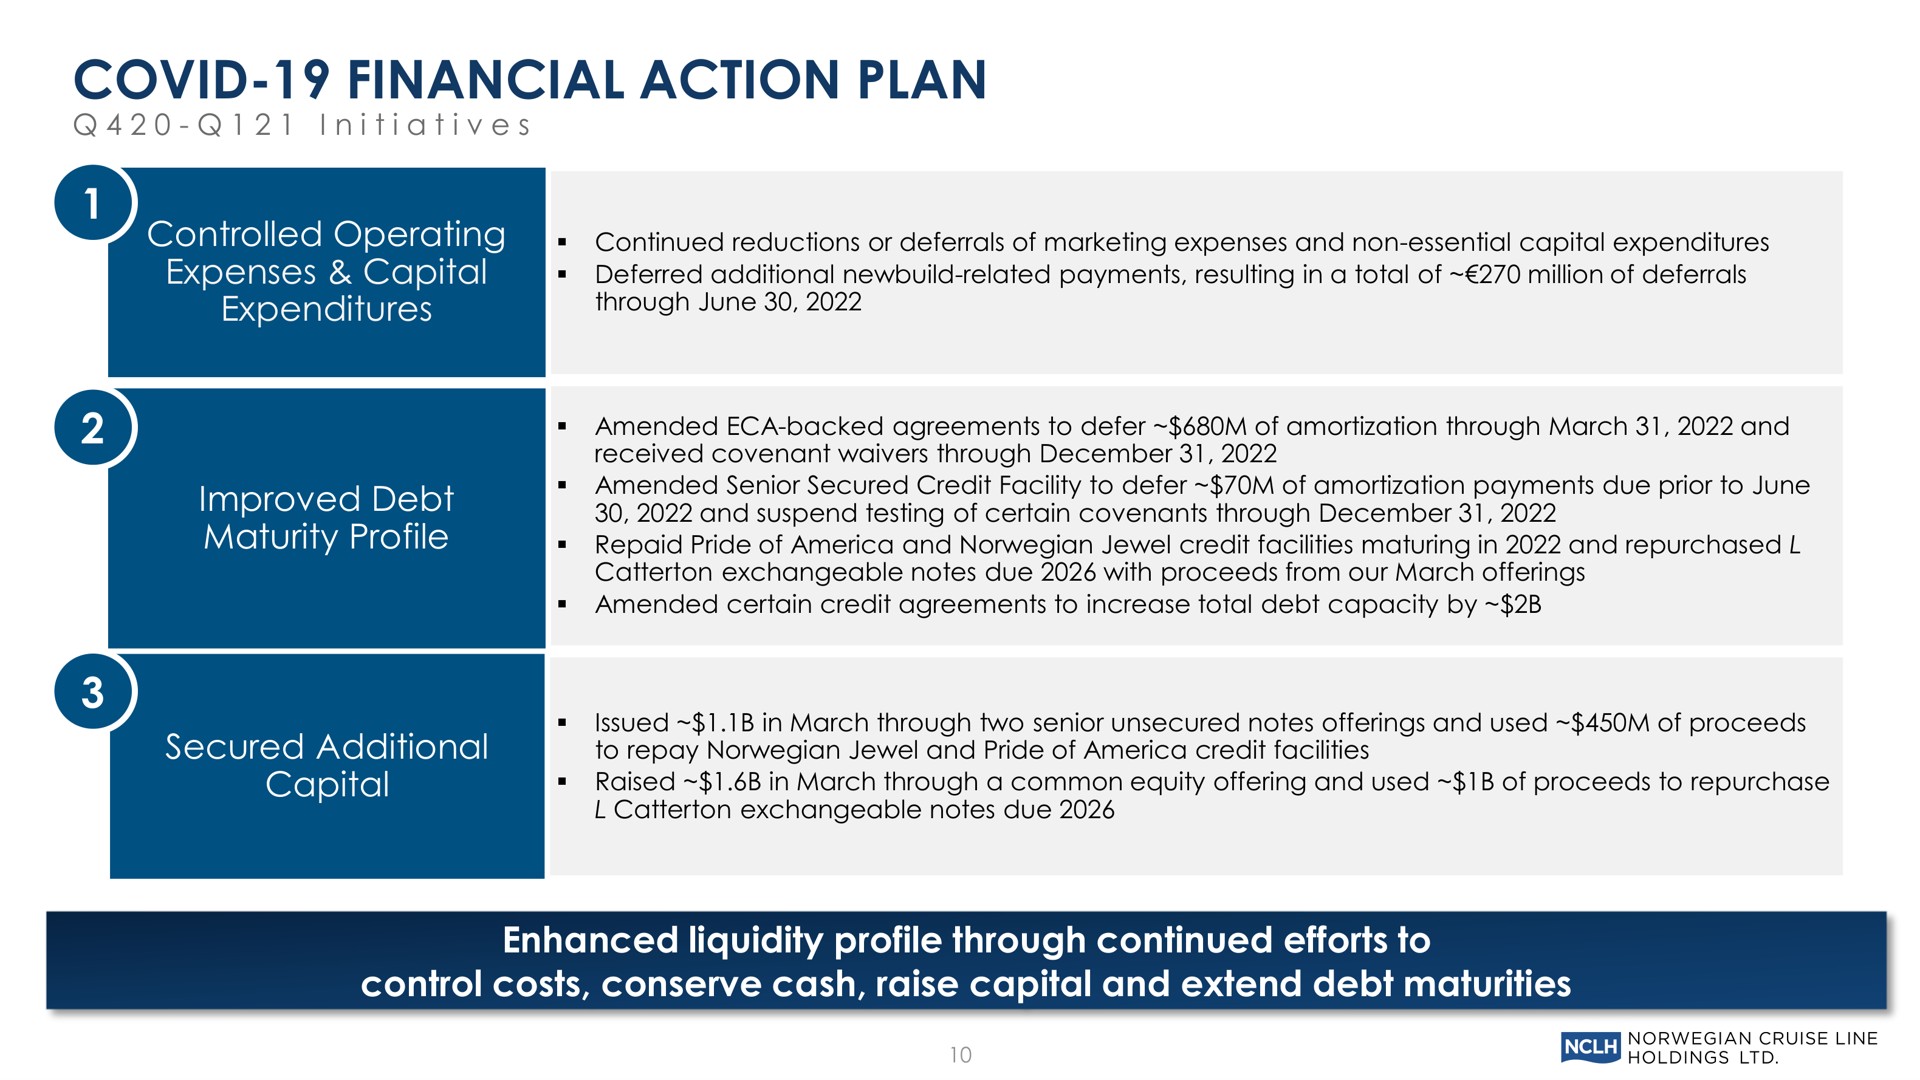 covid financial action plan enhanced liquidity profile through continued efforts to control costs conserve cash raise capital and extend debt maturities | Norwegian Cruise Line